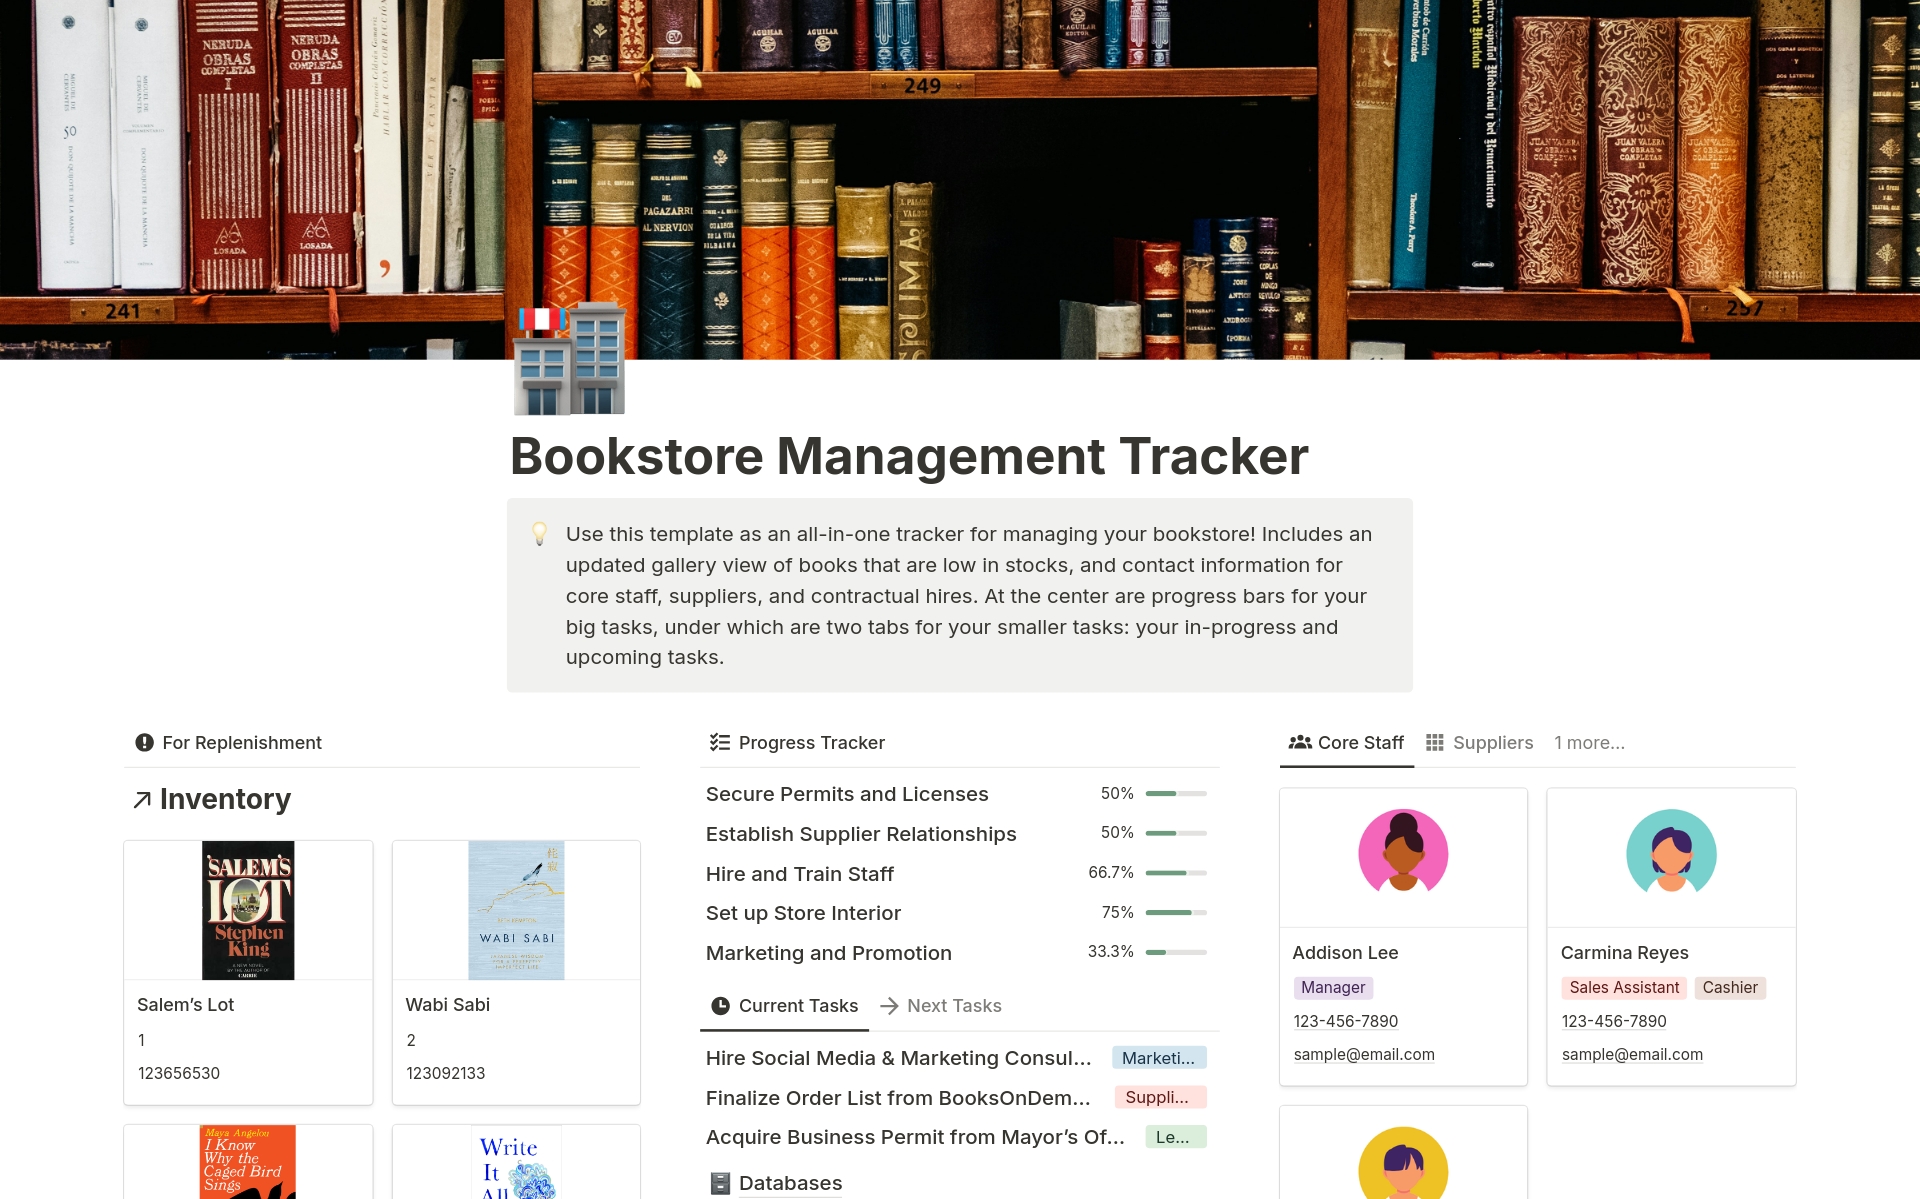 An all-in-one dashboard of trackers and profiles for managing your bookstore.